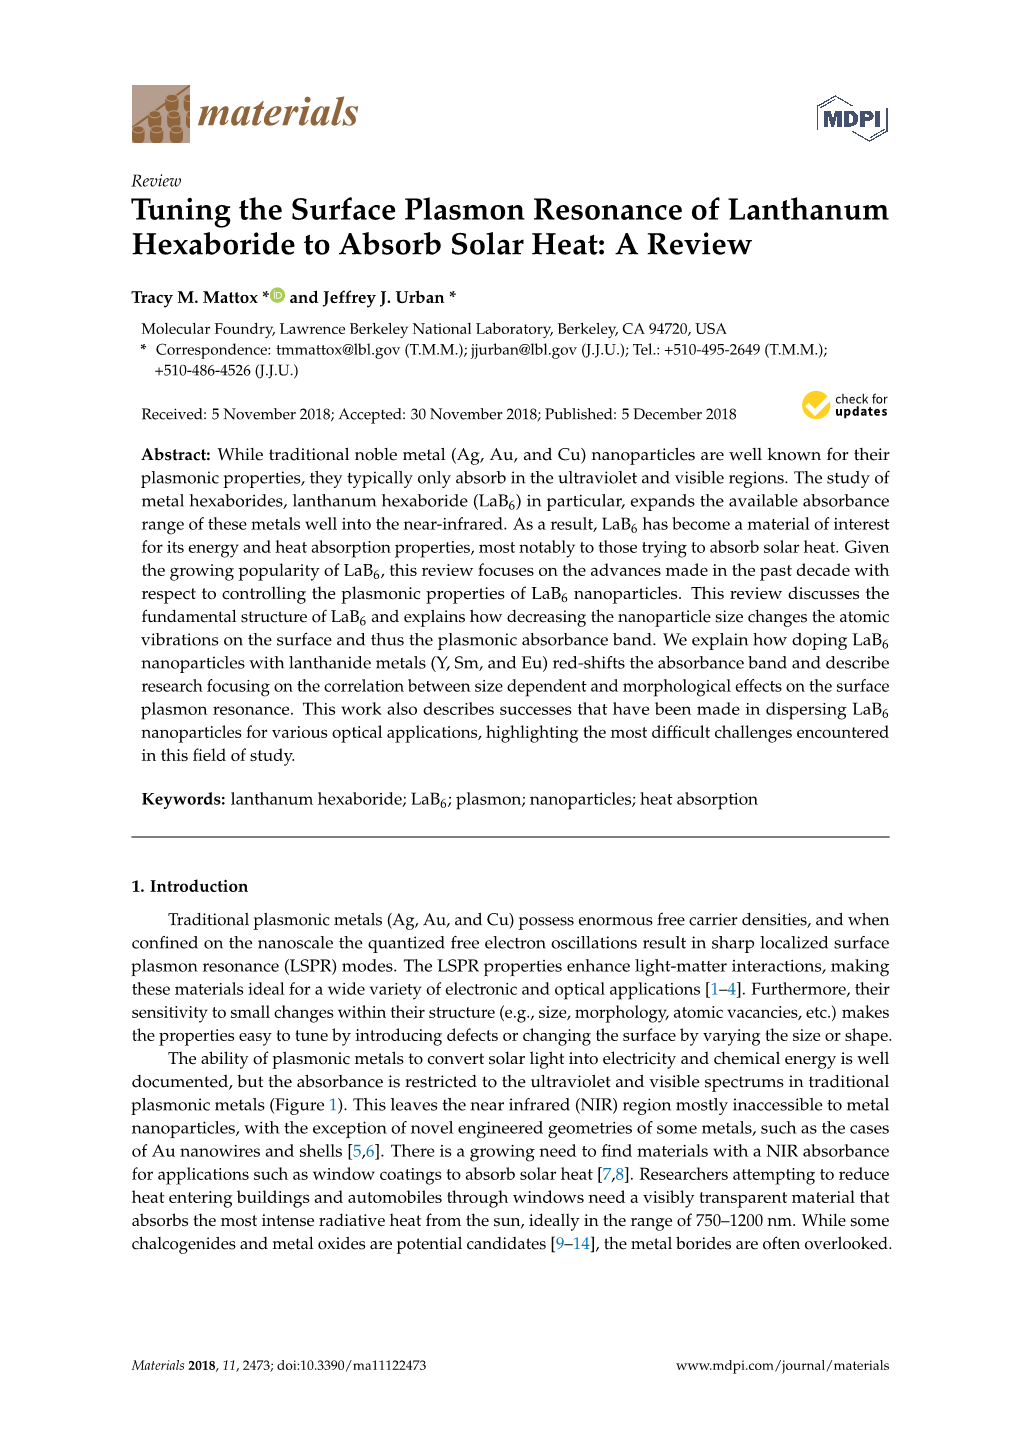 Tuning the Surface Plasmon Resonance of Lanthanum Hexaboride to Absorb Solar Heat: a Review